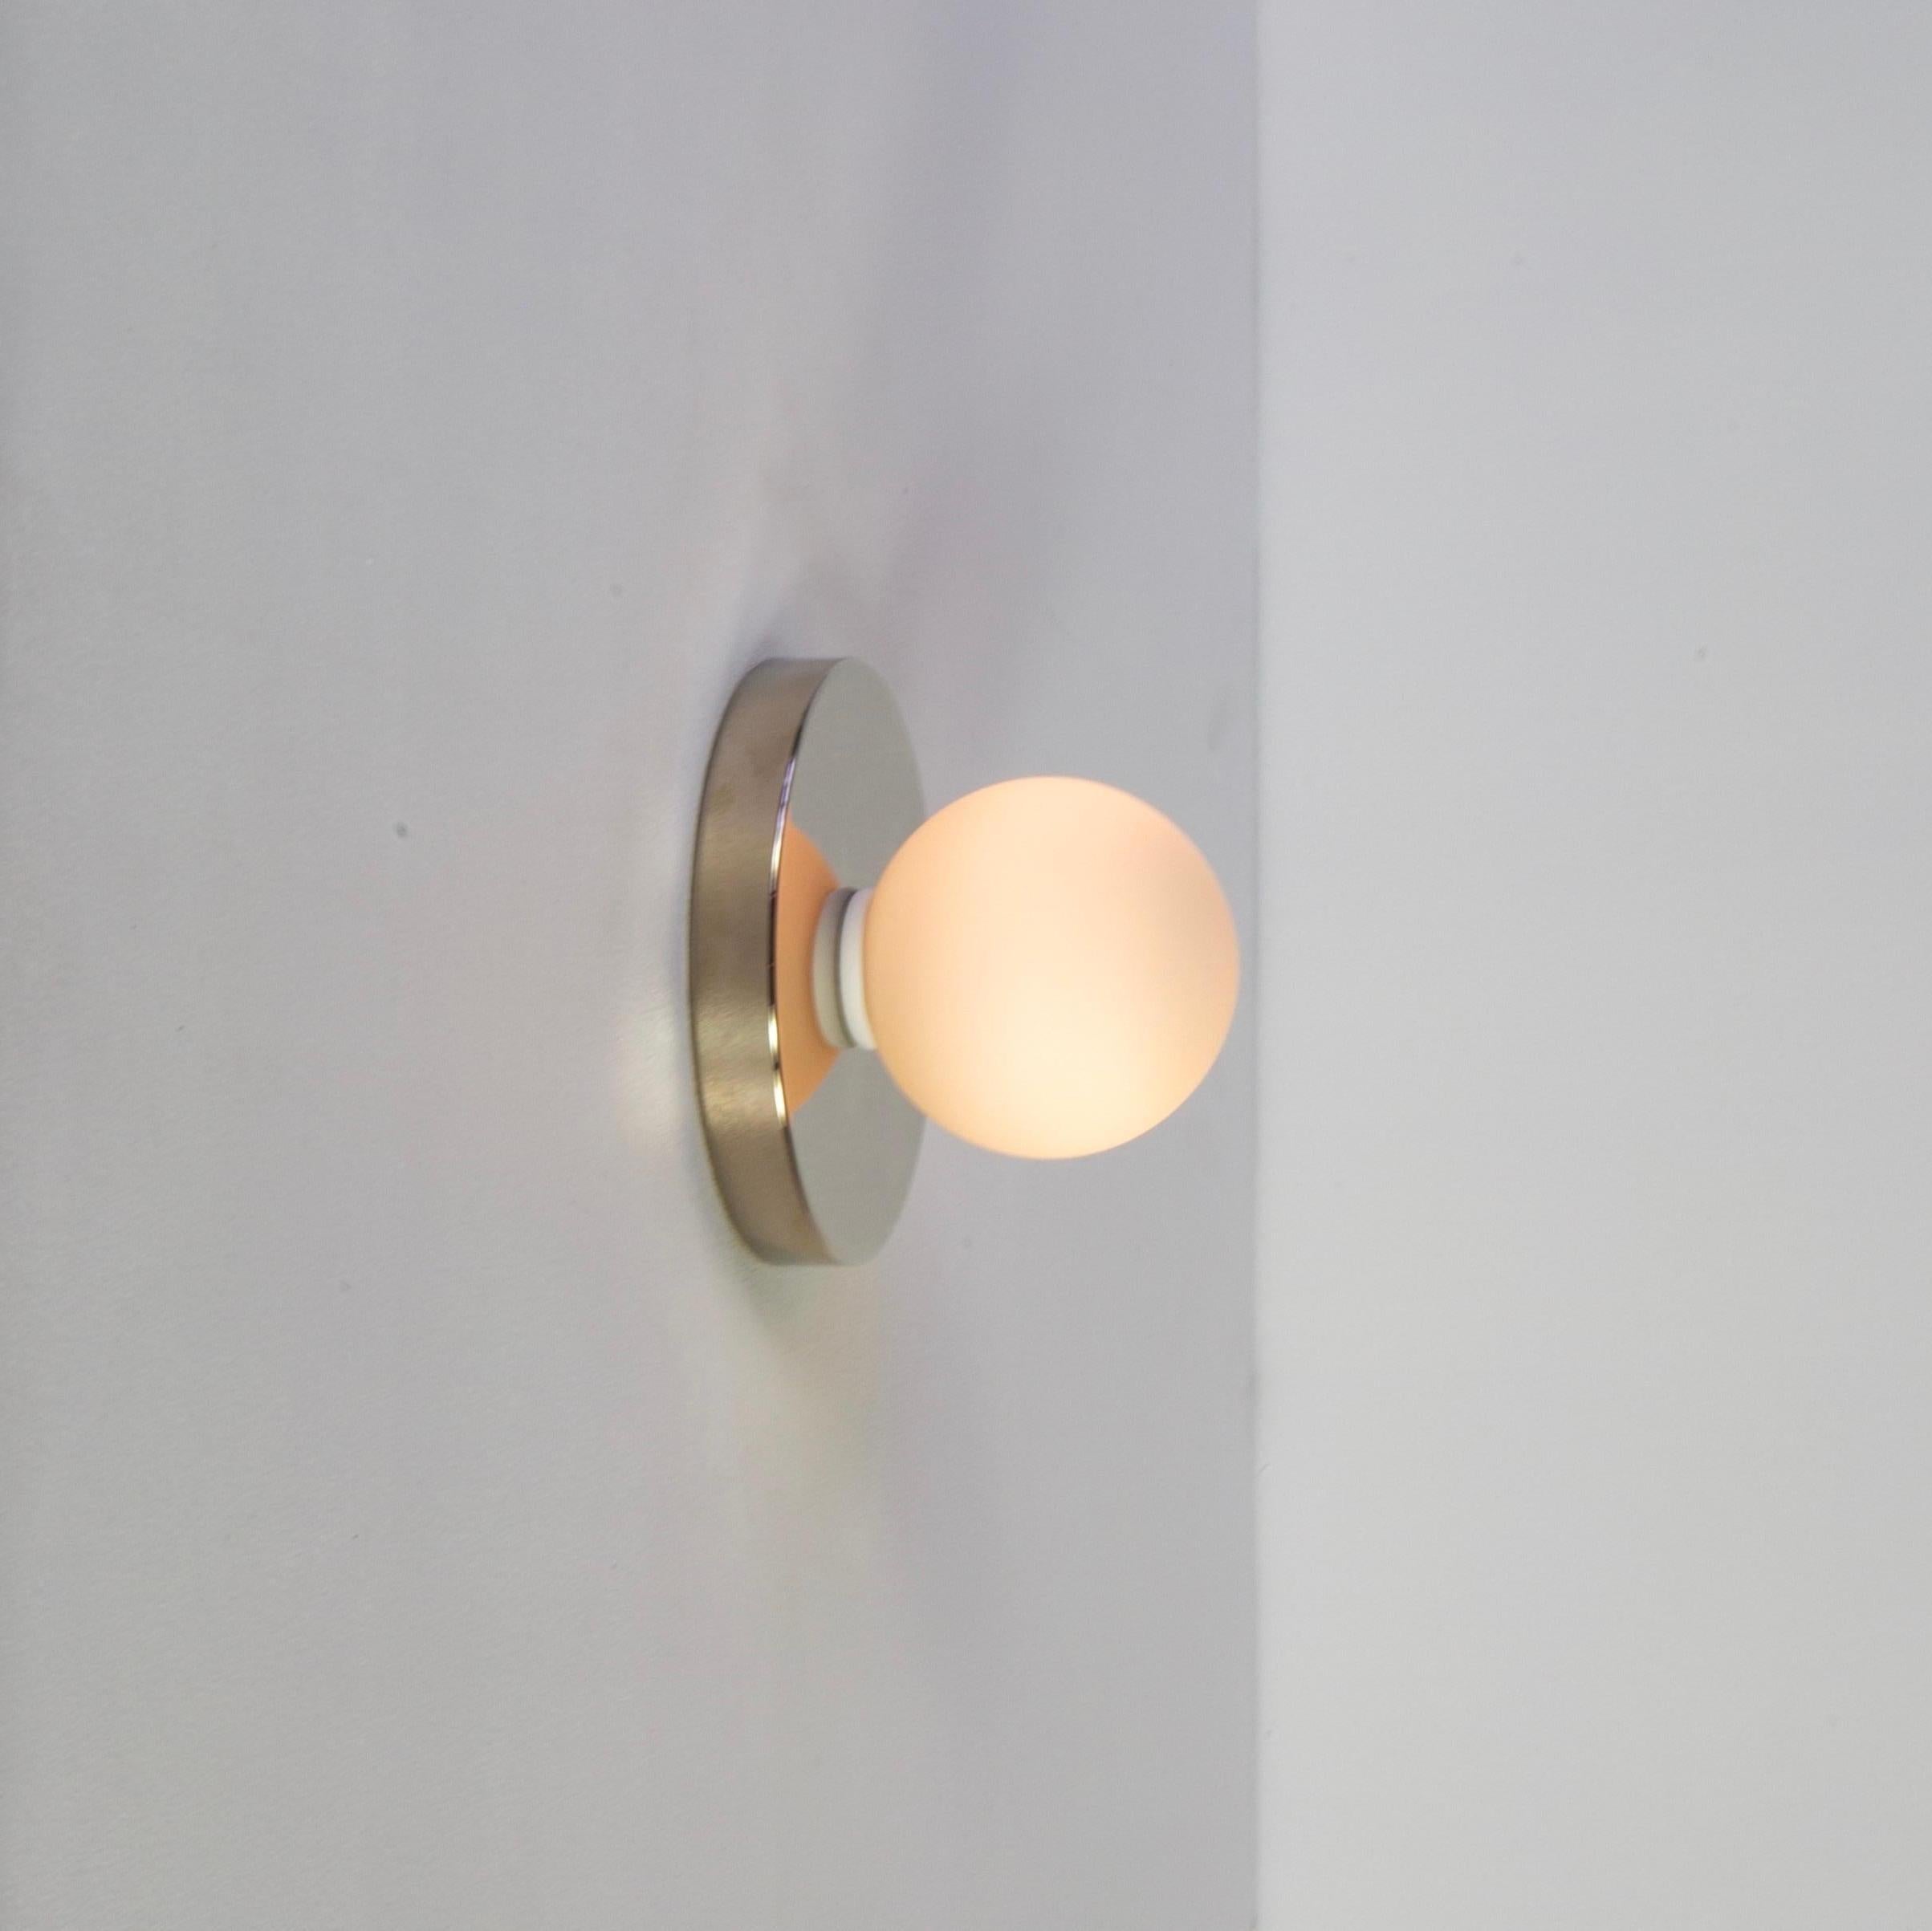 Plated Set of 4 Globe Sconces by Research.Lighting, Polished Nickel, Made to Order For Sale